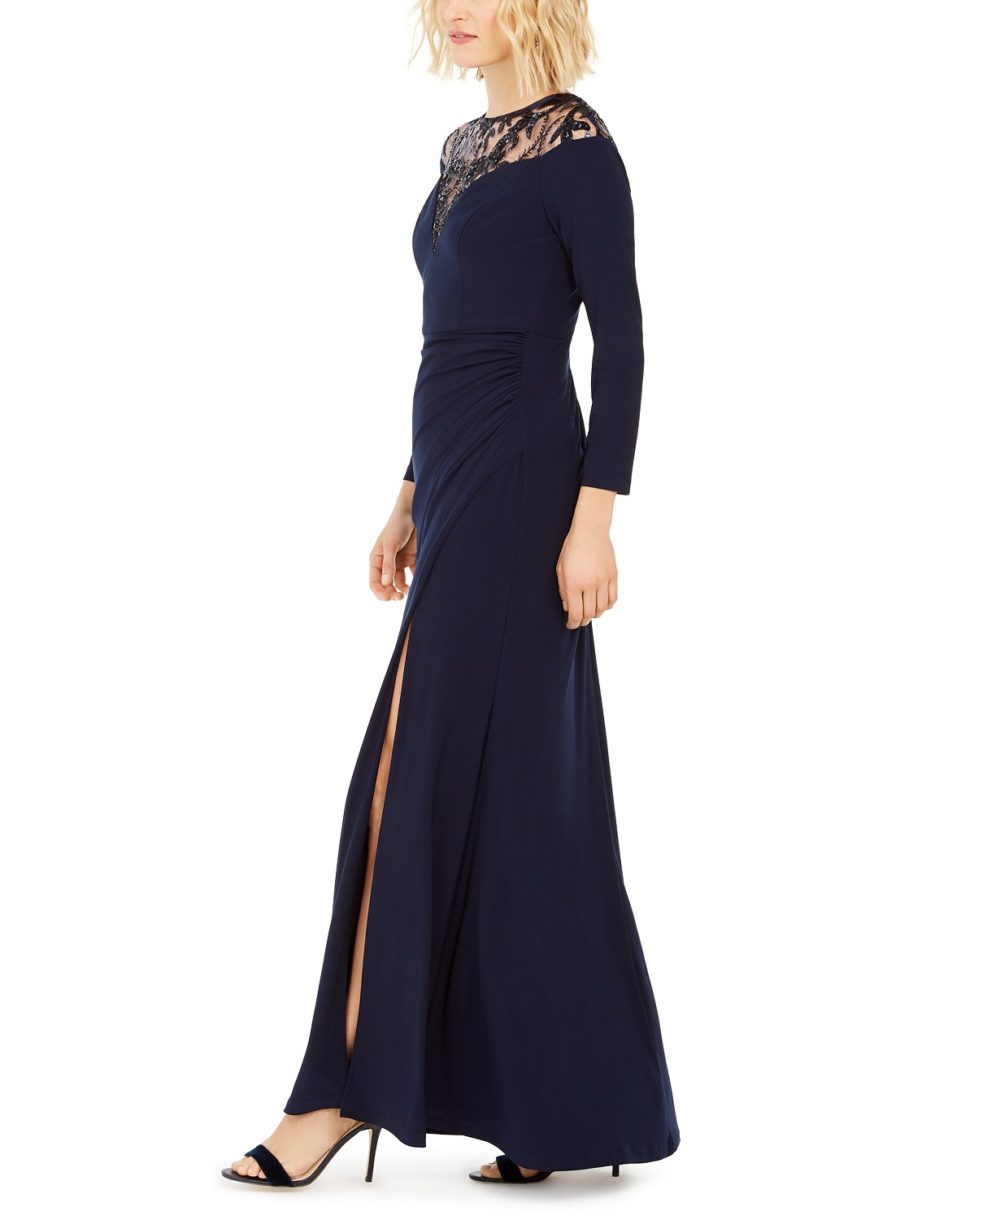 woocommerce-673321-2209615.cloudwaysapps.com-adrianna-papell-womens-navy-illusion-lace-gown-dress